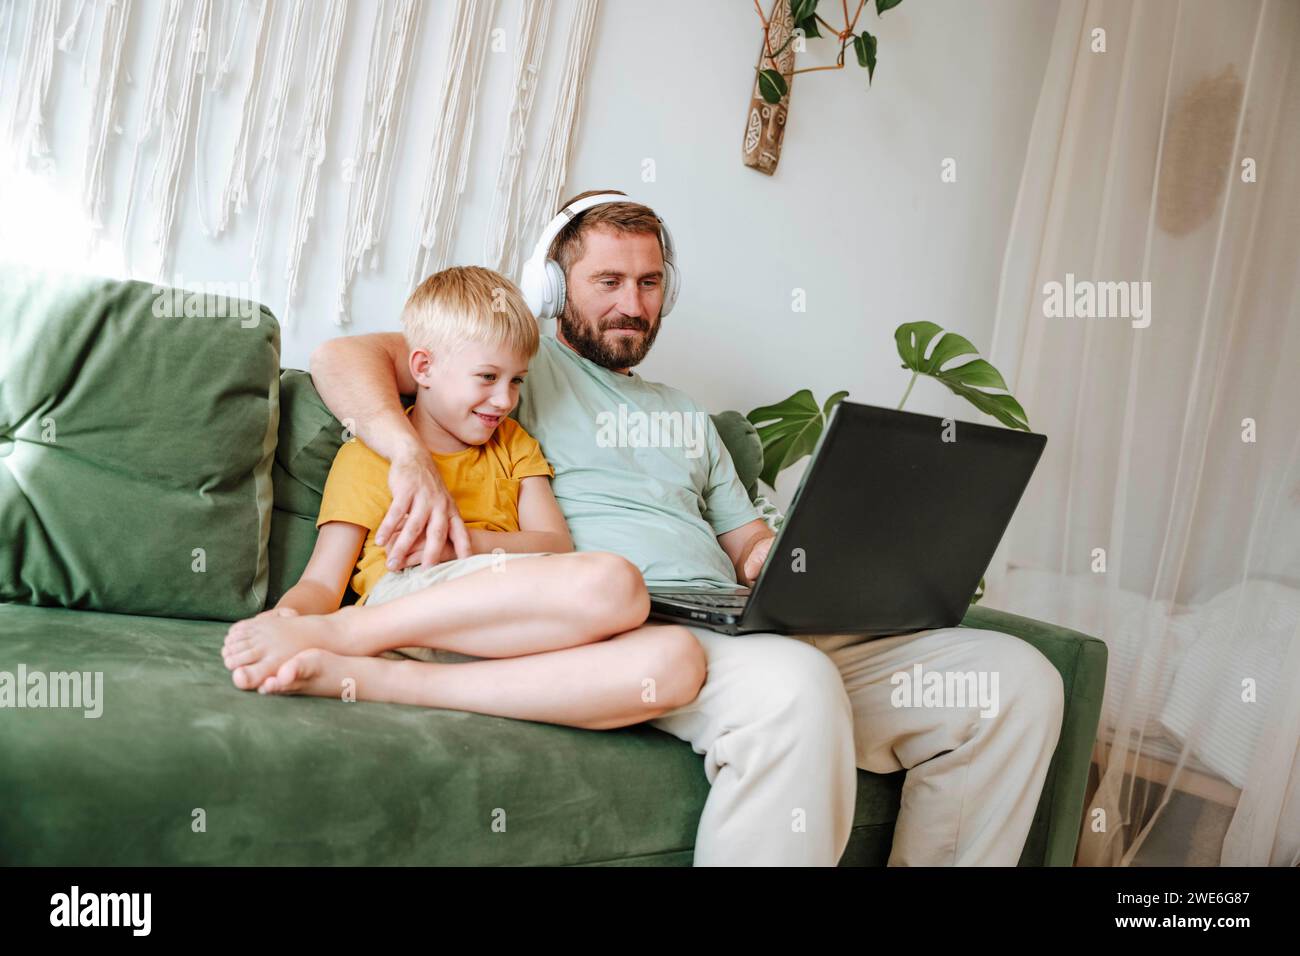 Father and son looking at a laptop while sitting on the couch at home Stock Photo